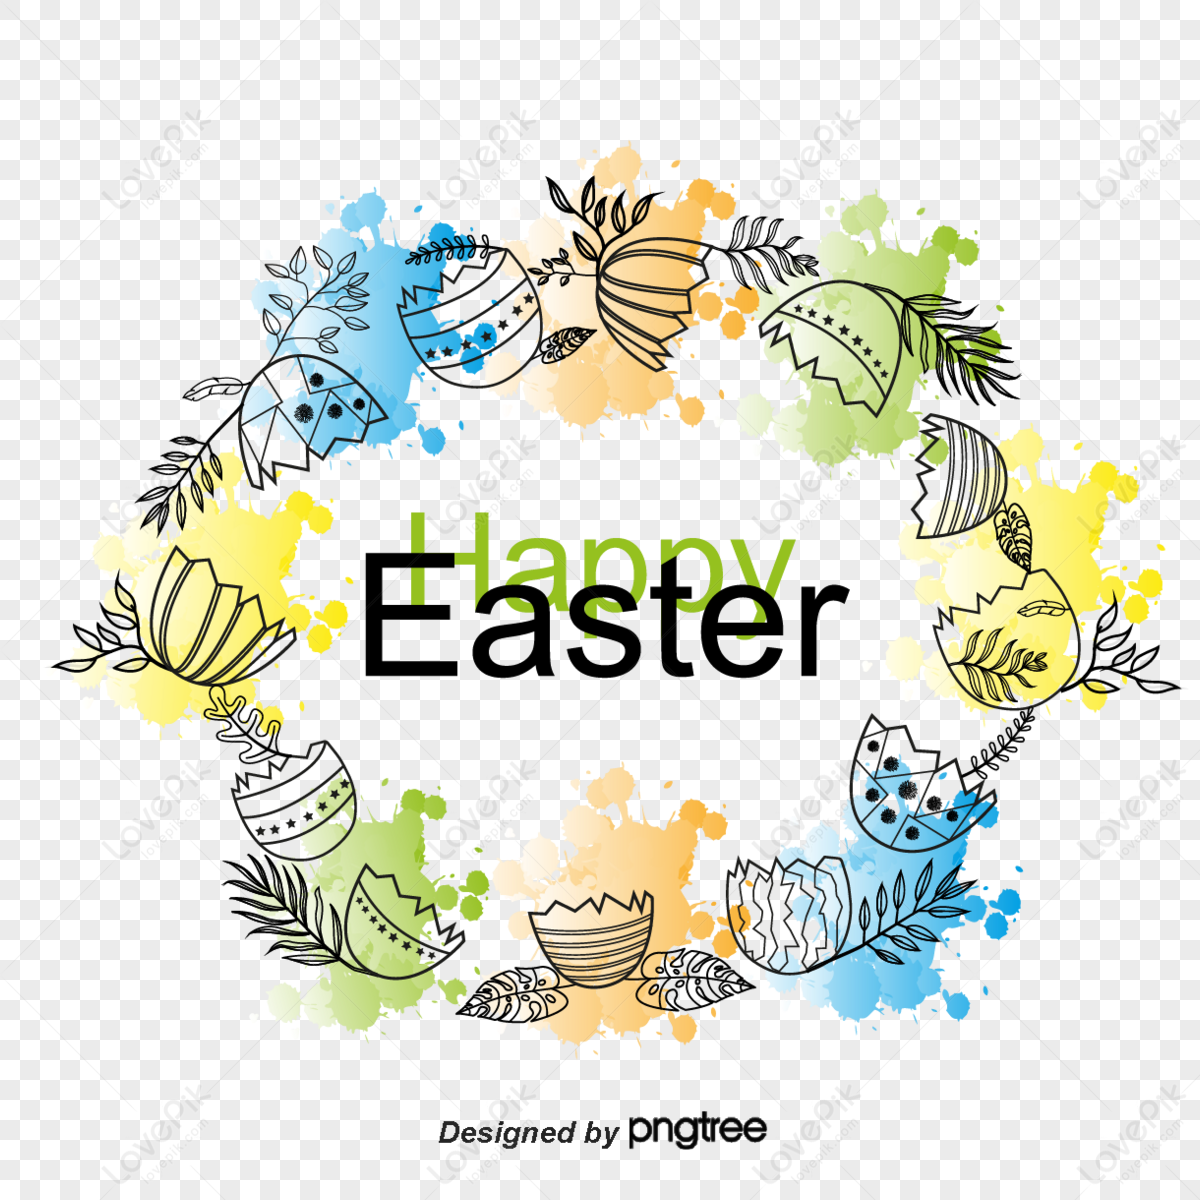 Happy Easter Coloring Pages - Get Coloring Pages